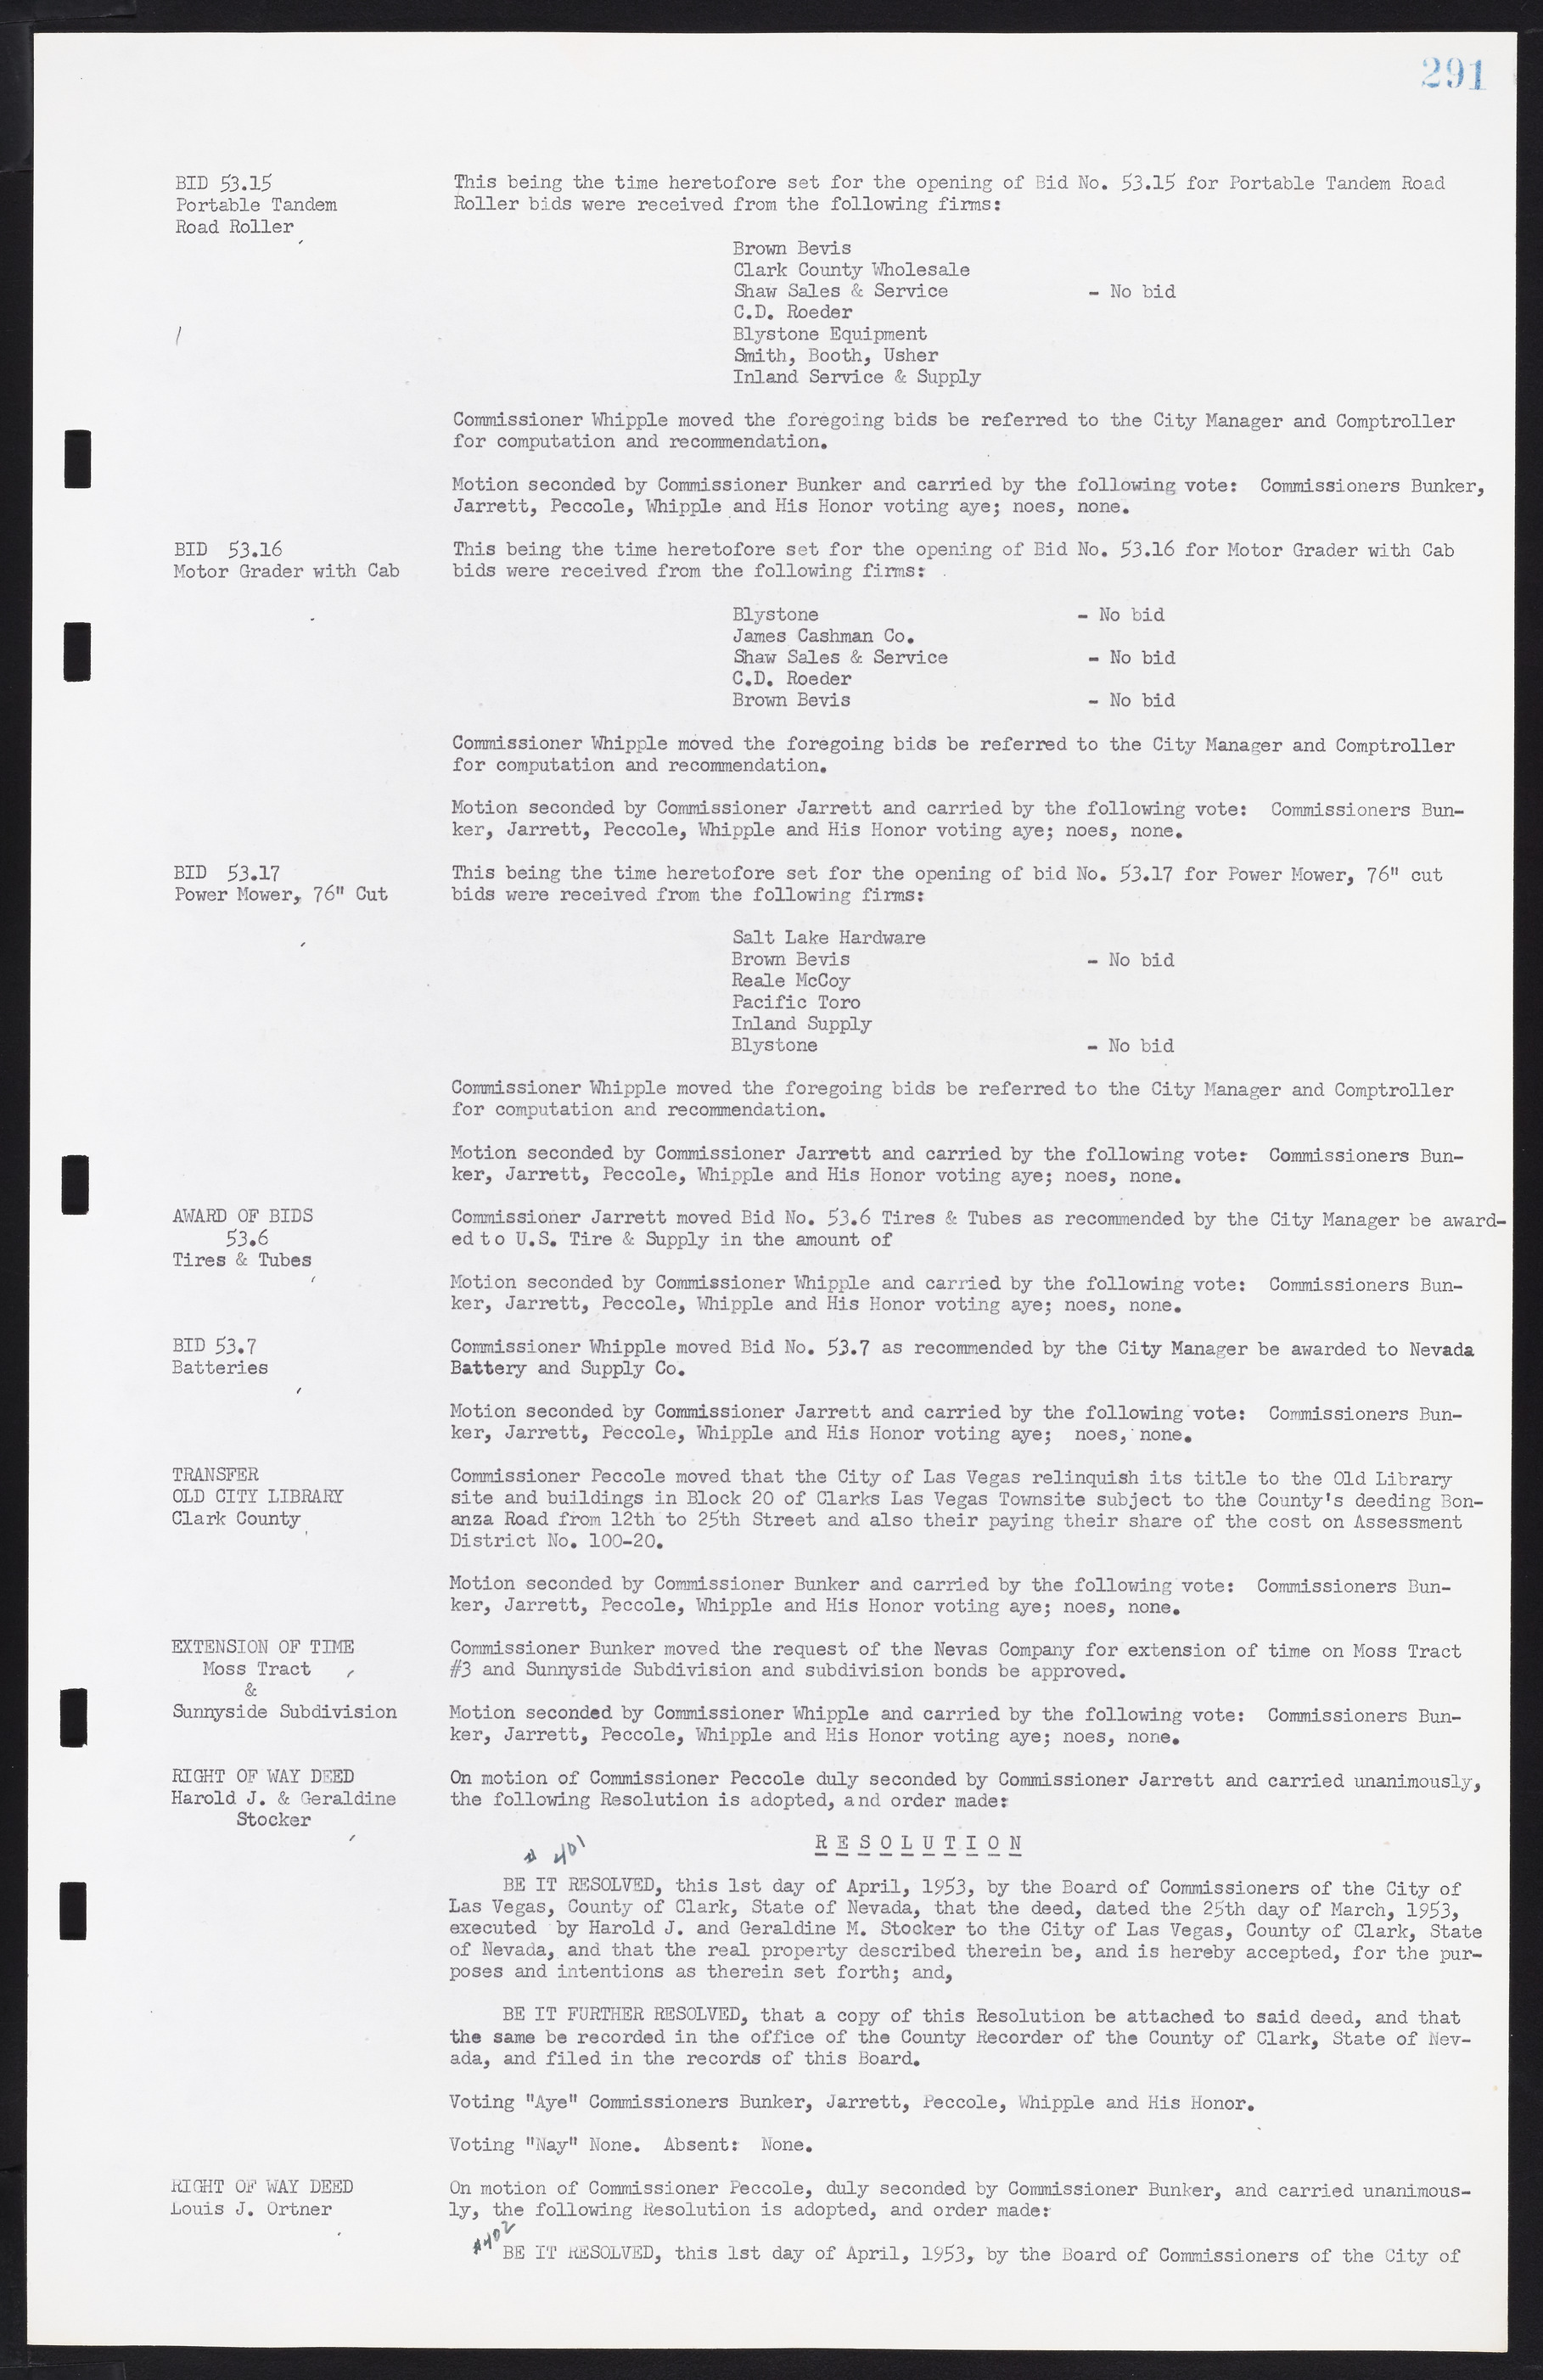 Las Vegas City Commission Minutes, May 26, 1952 to February 17, 1954, lvc000008-319